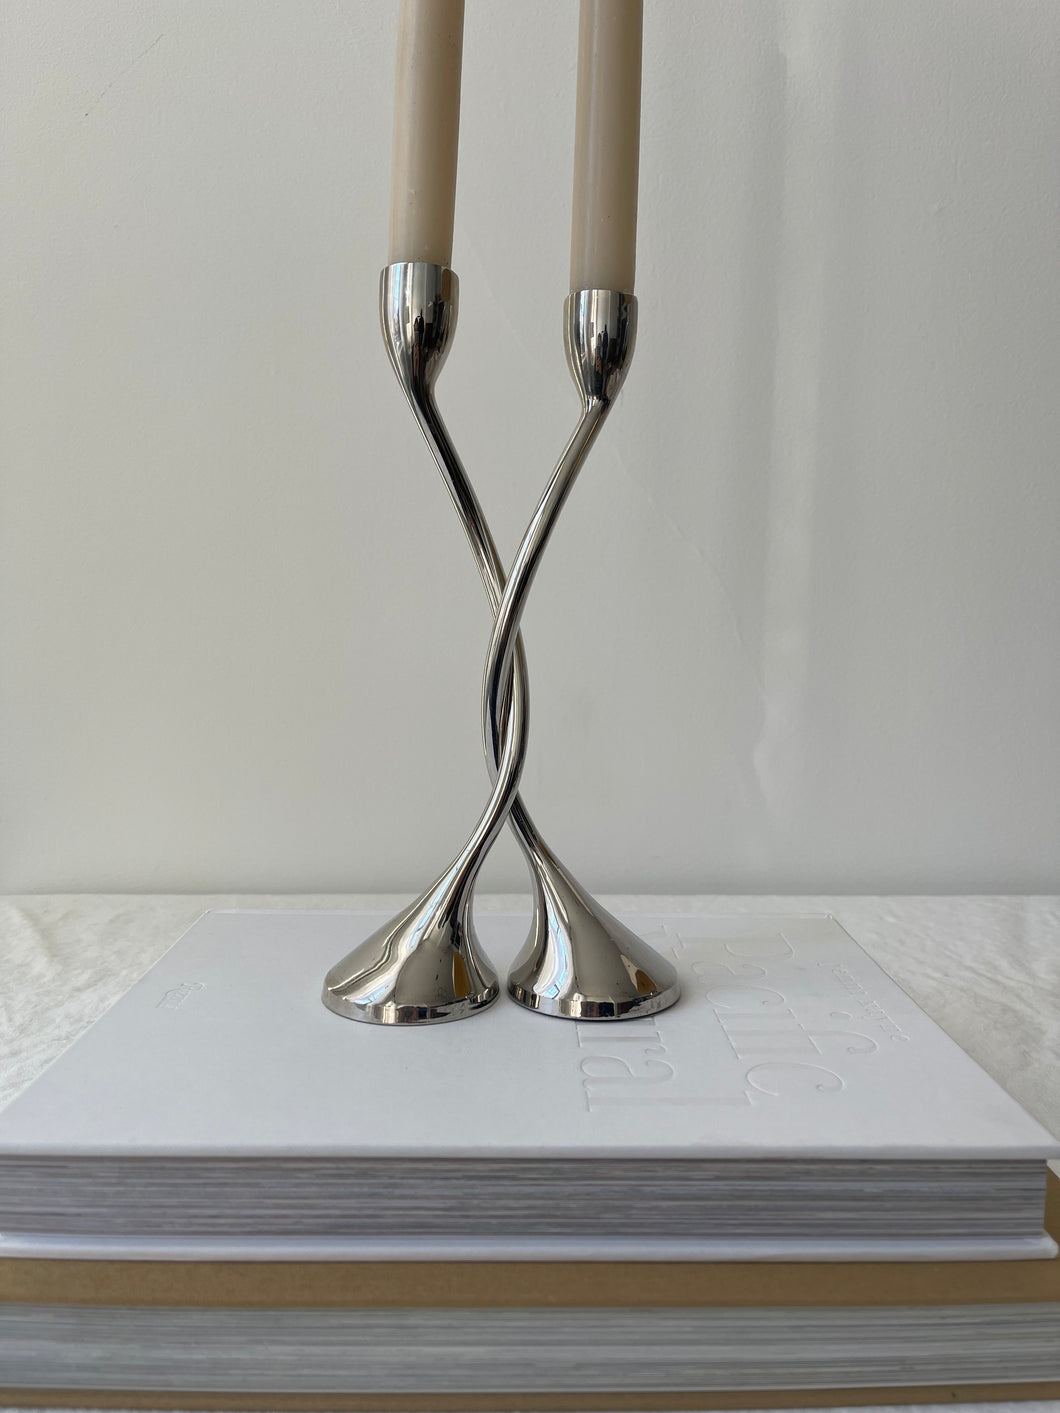 Adjoining Chrome Candle Holders